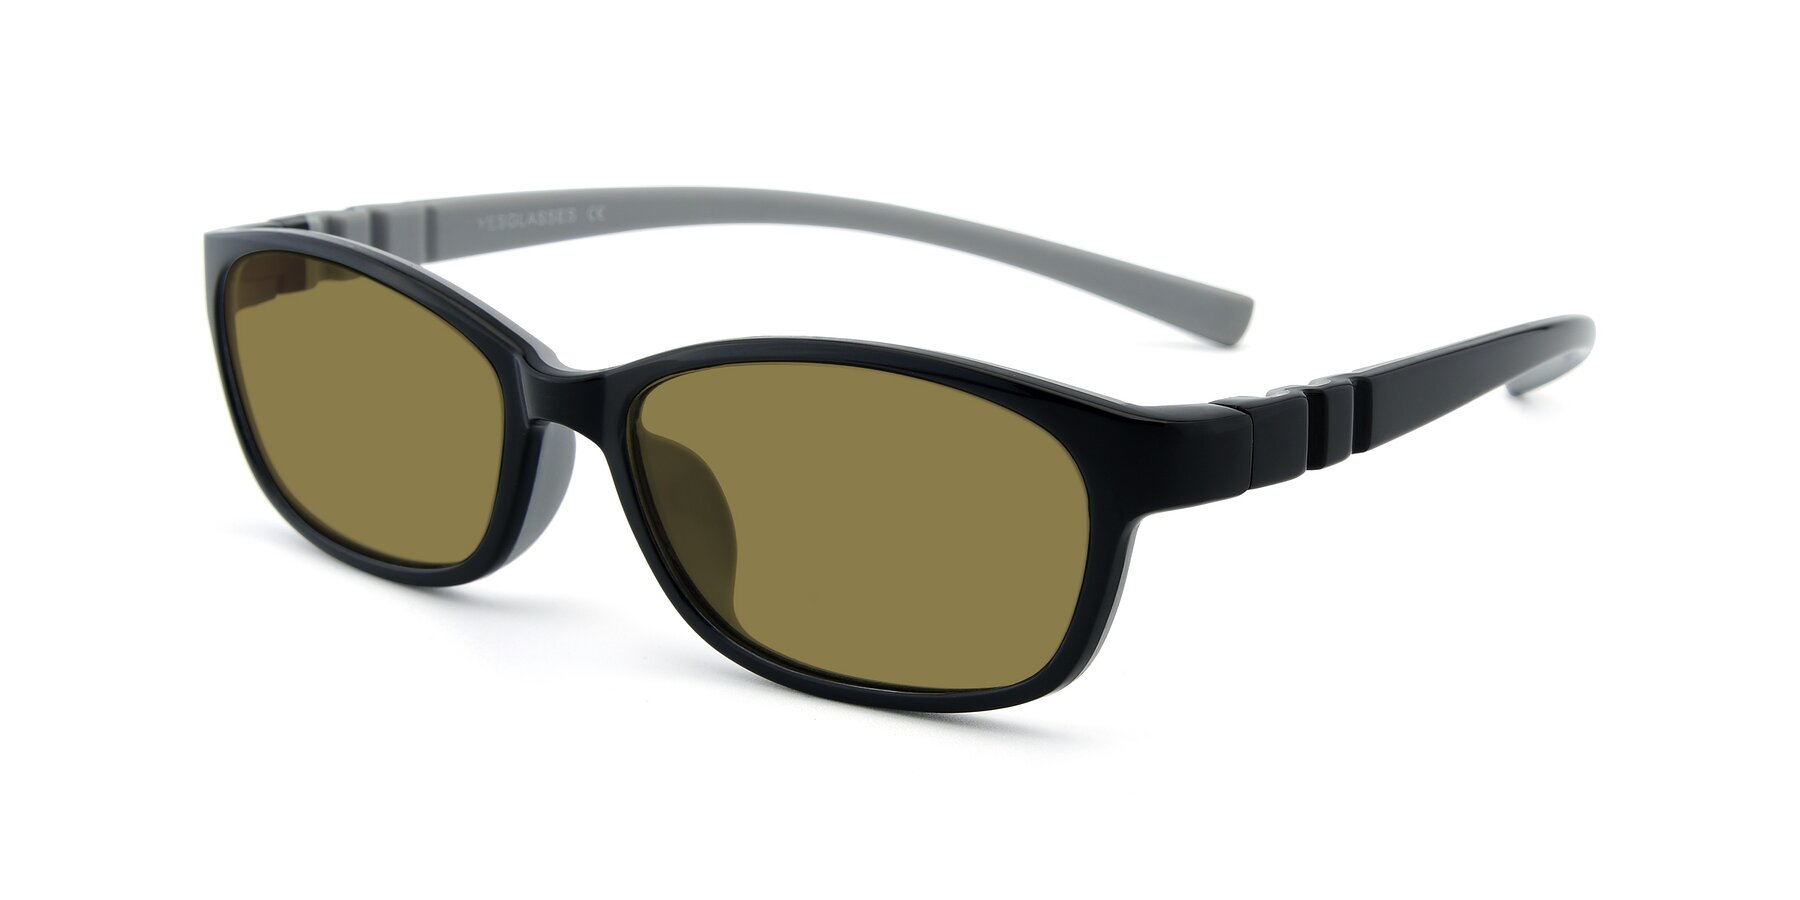 Angle of 556 in Black-Gray with Brown Polarized Lenses